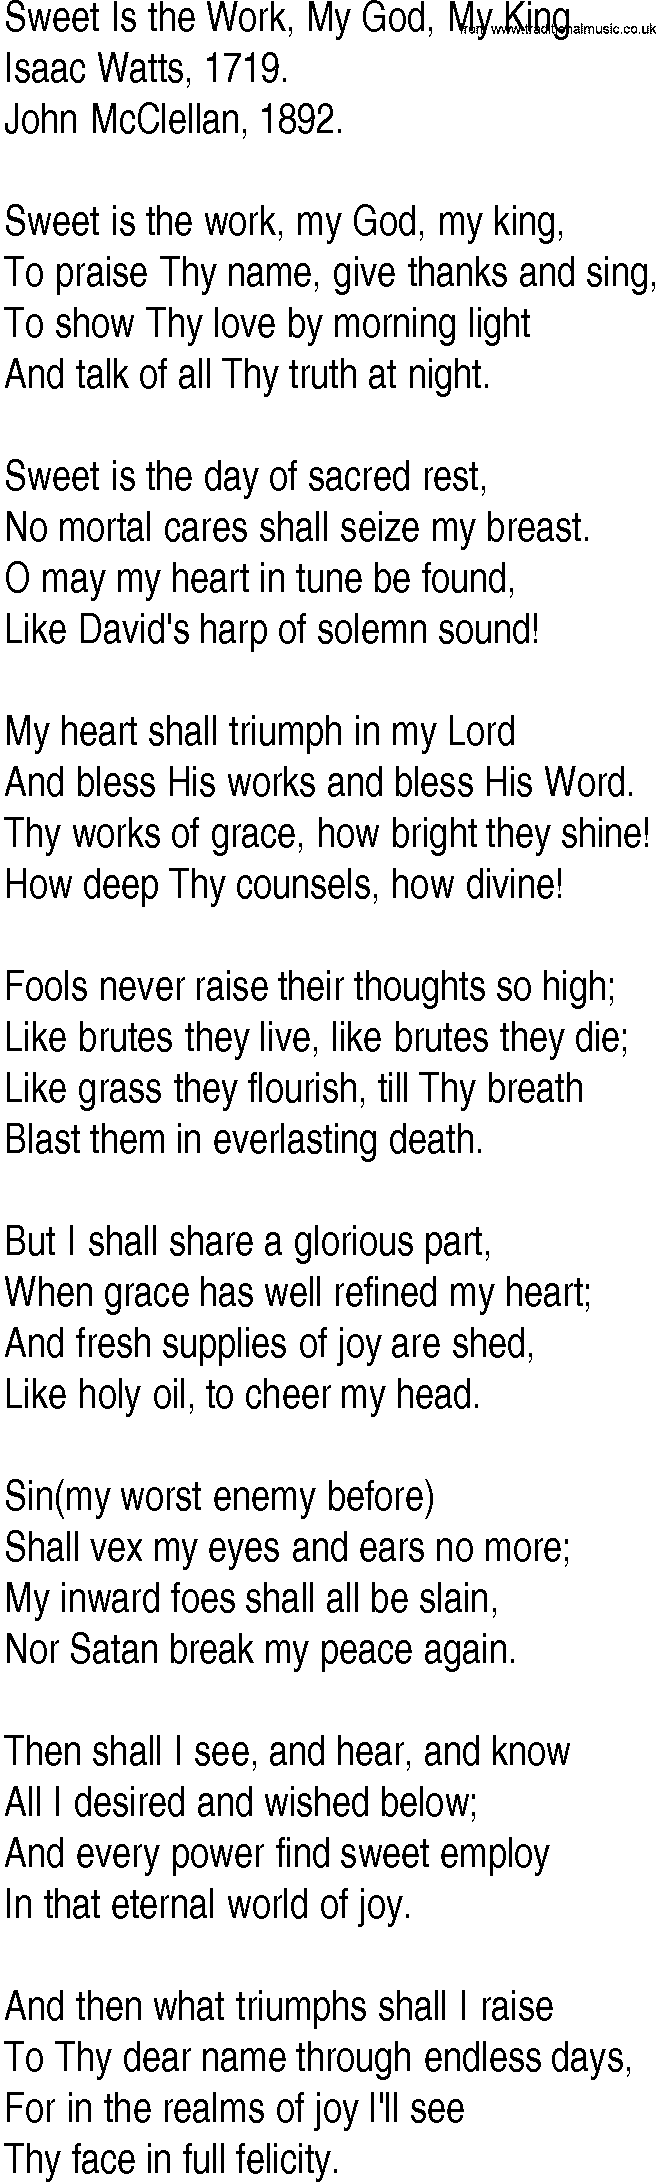 Hymn and Gospel Song: Sweet Is the Work, My God, My King by Isaac Watts lyrics